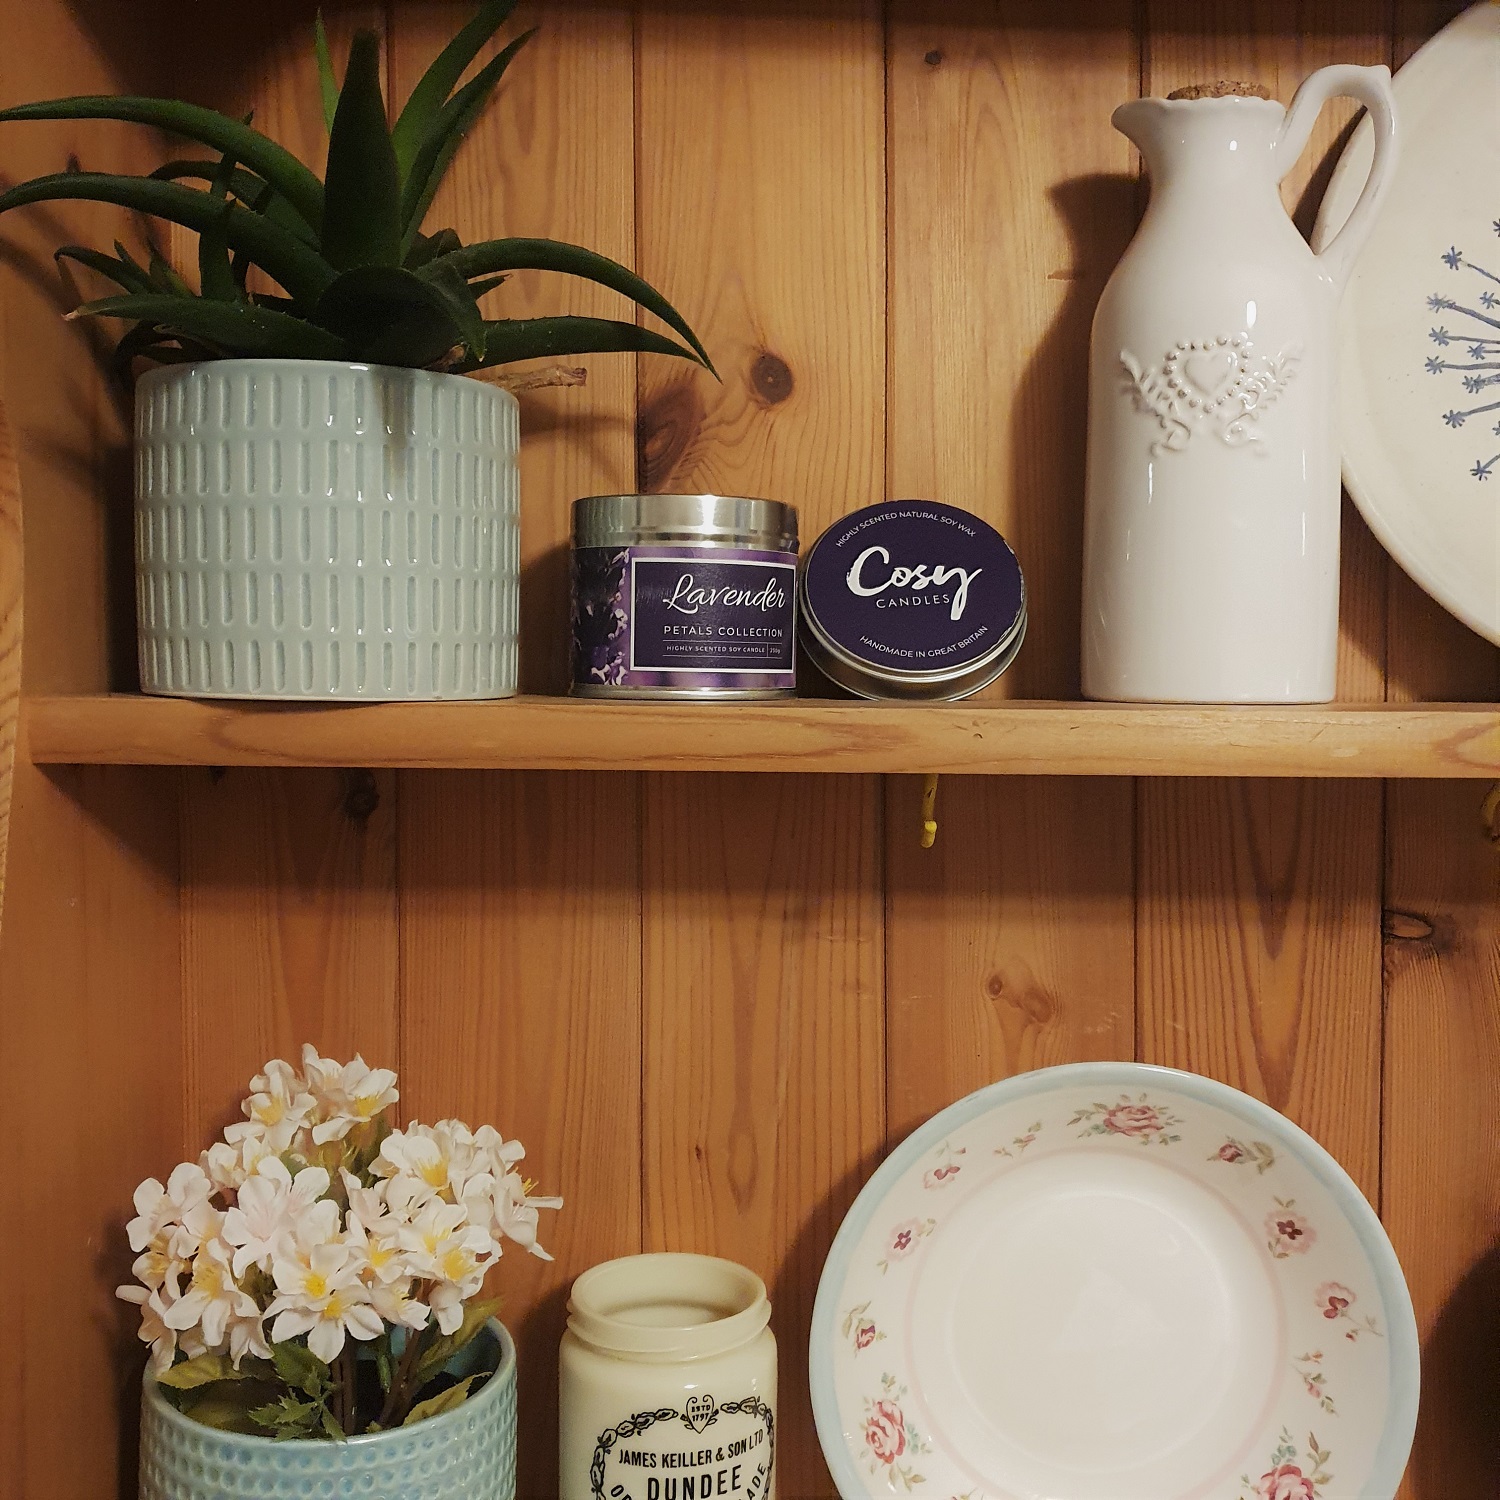 A shelf with assorted home decor and a Cosy Aromas candle